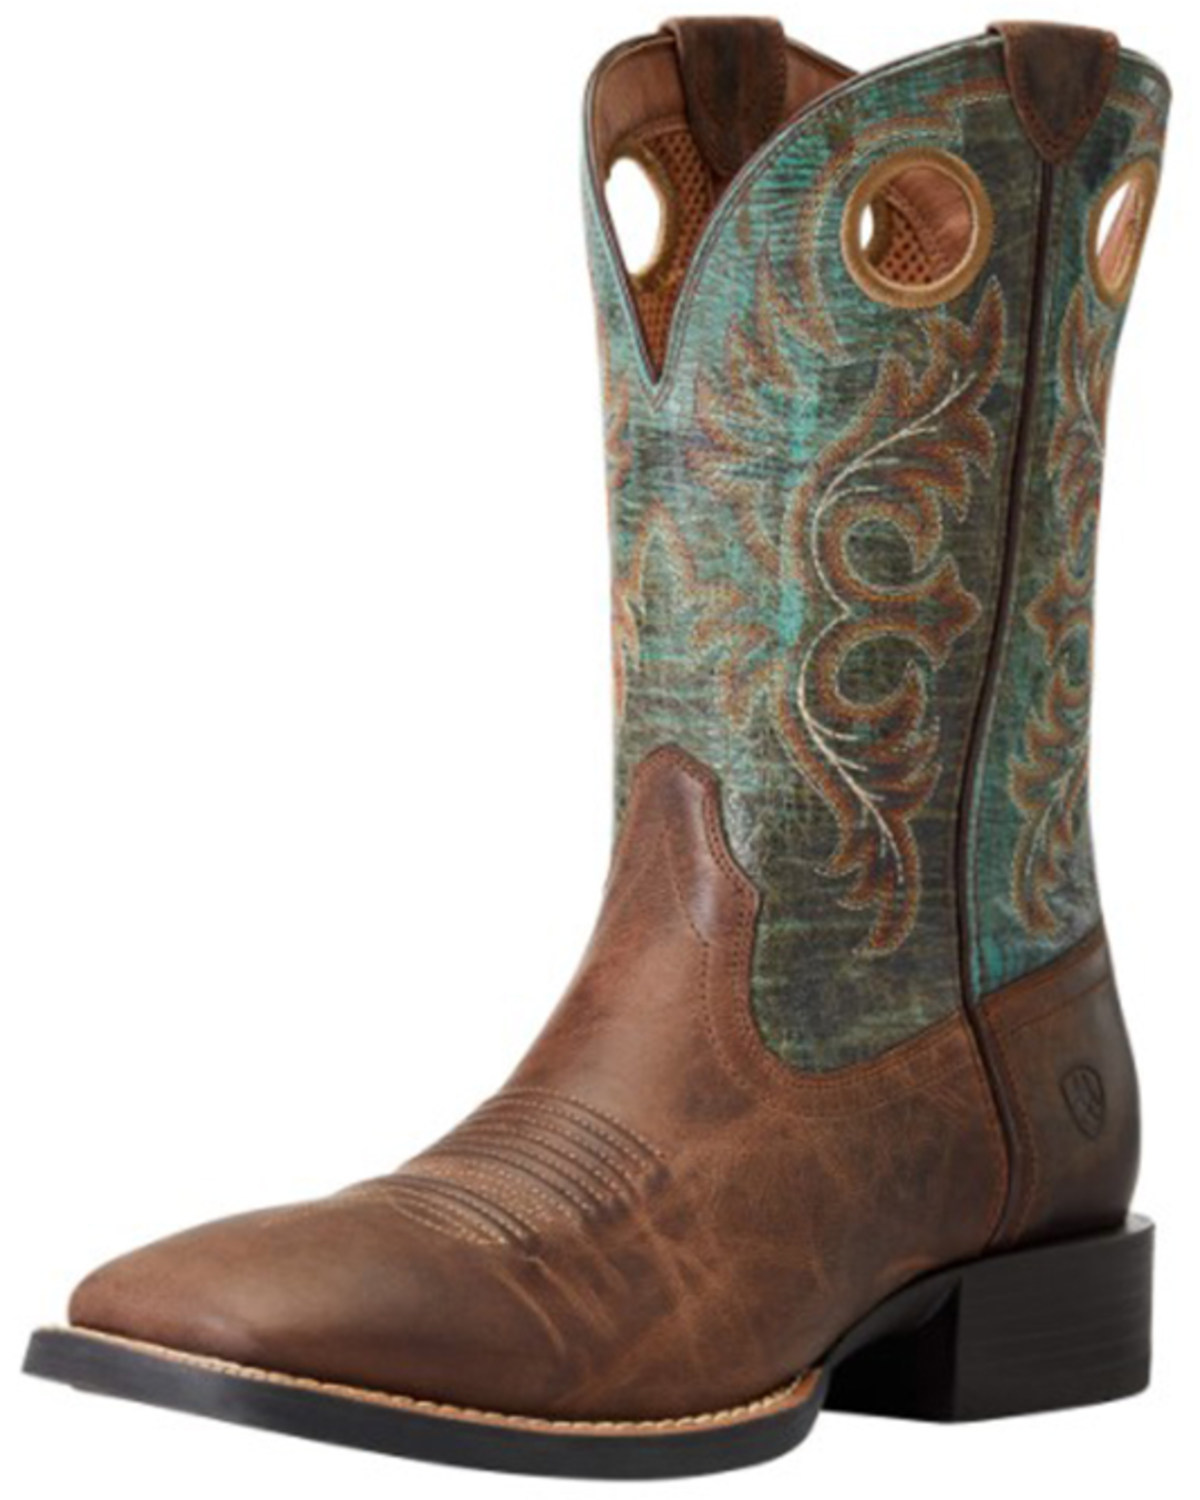 Ariat Men's Sport Rodeo Western Performance Boots - Broad Square Toe